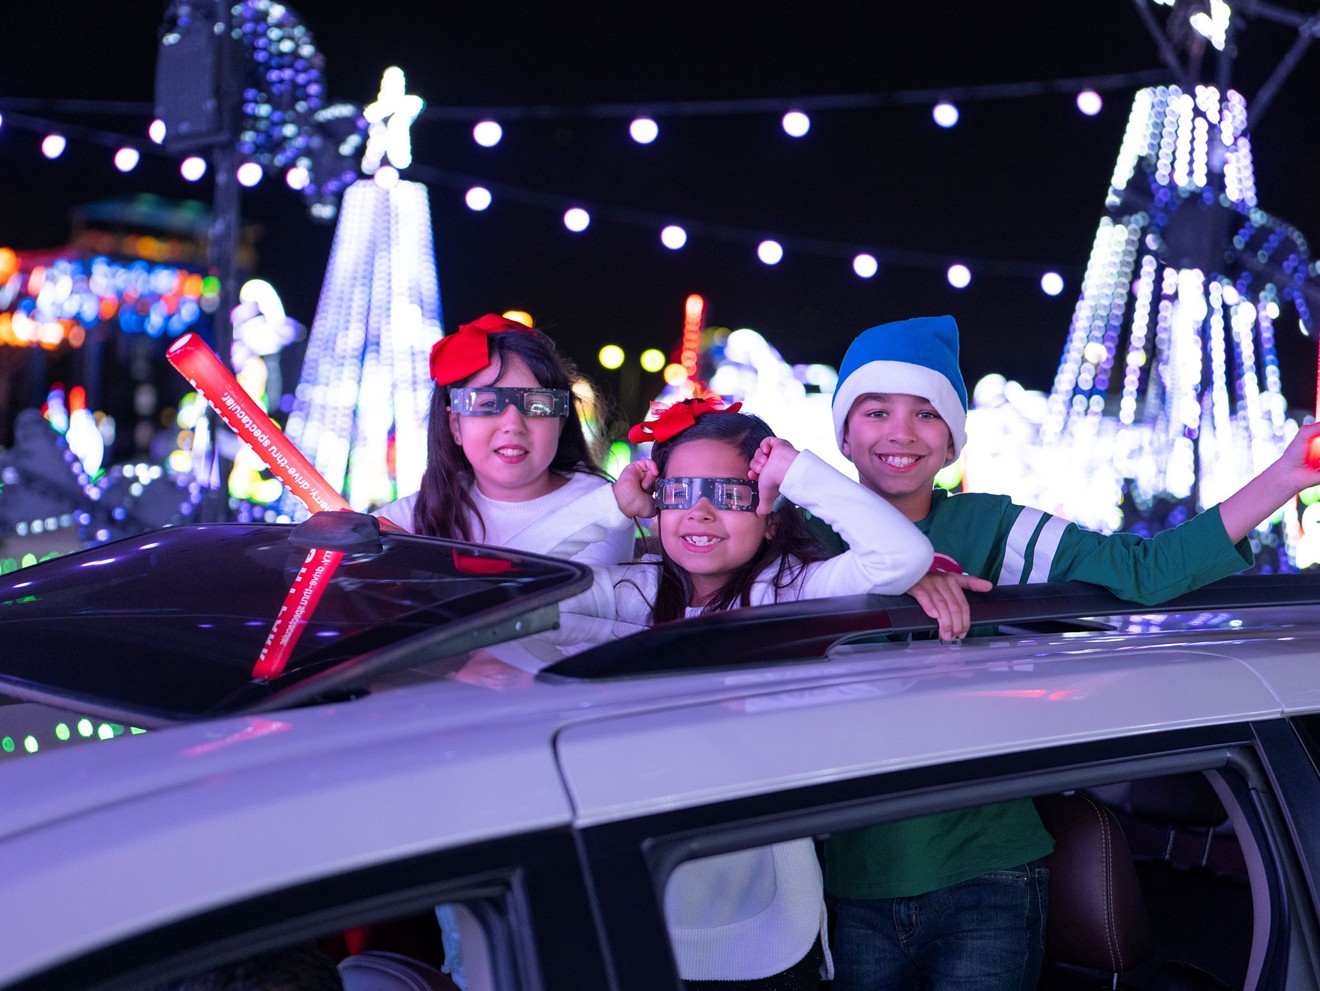 The Light Park- The most electrifying way to brighten the holidays!